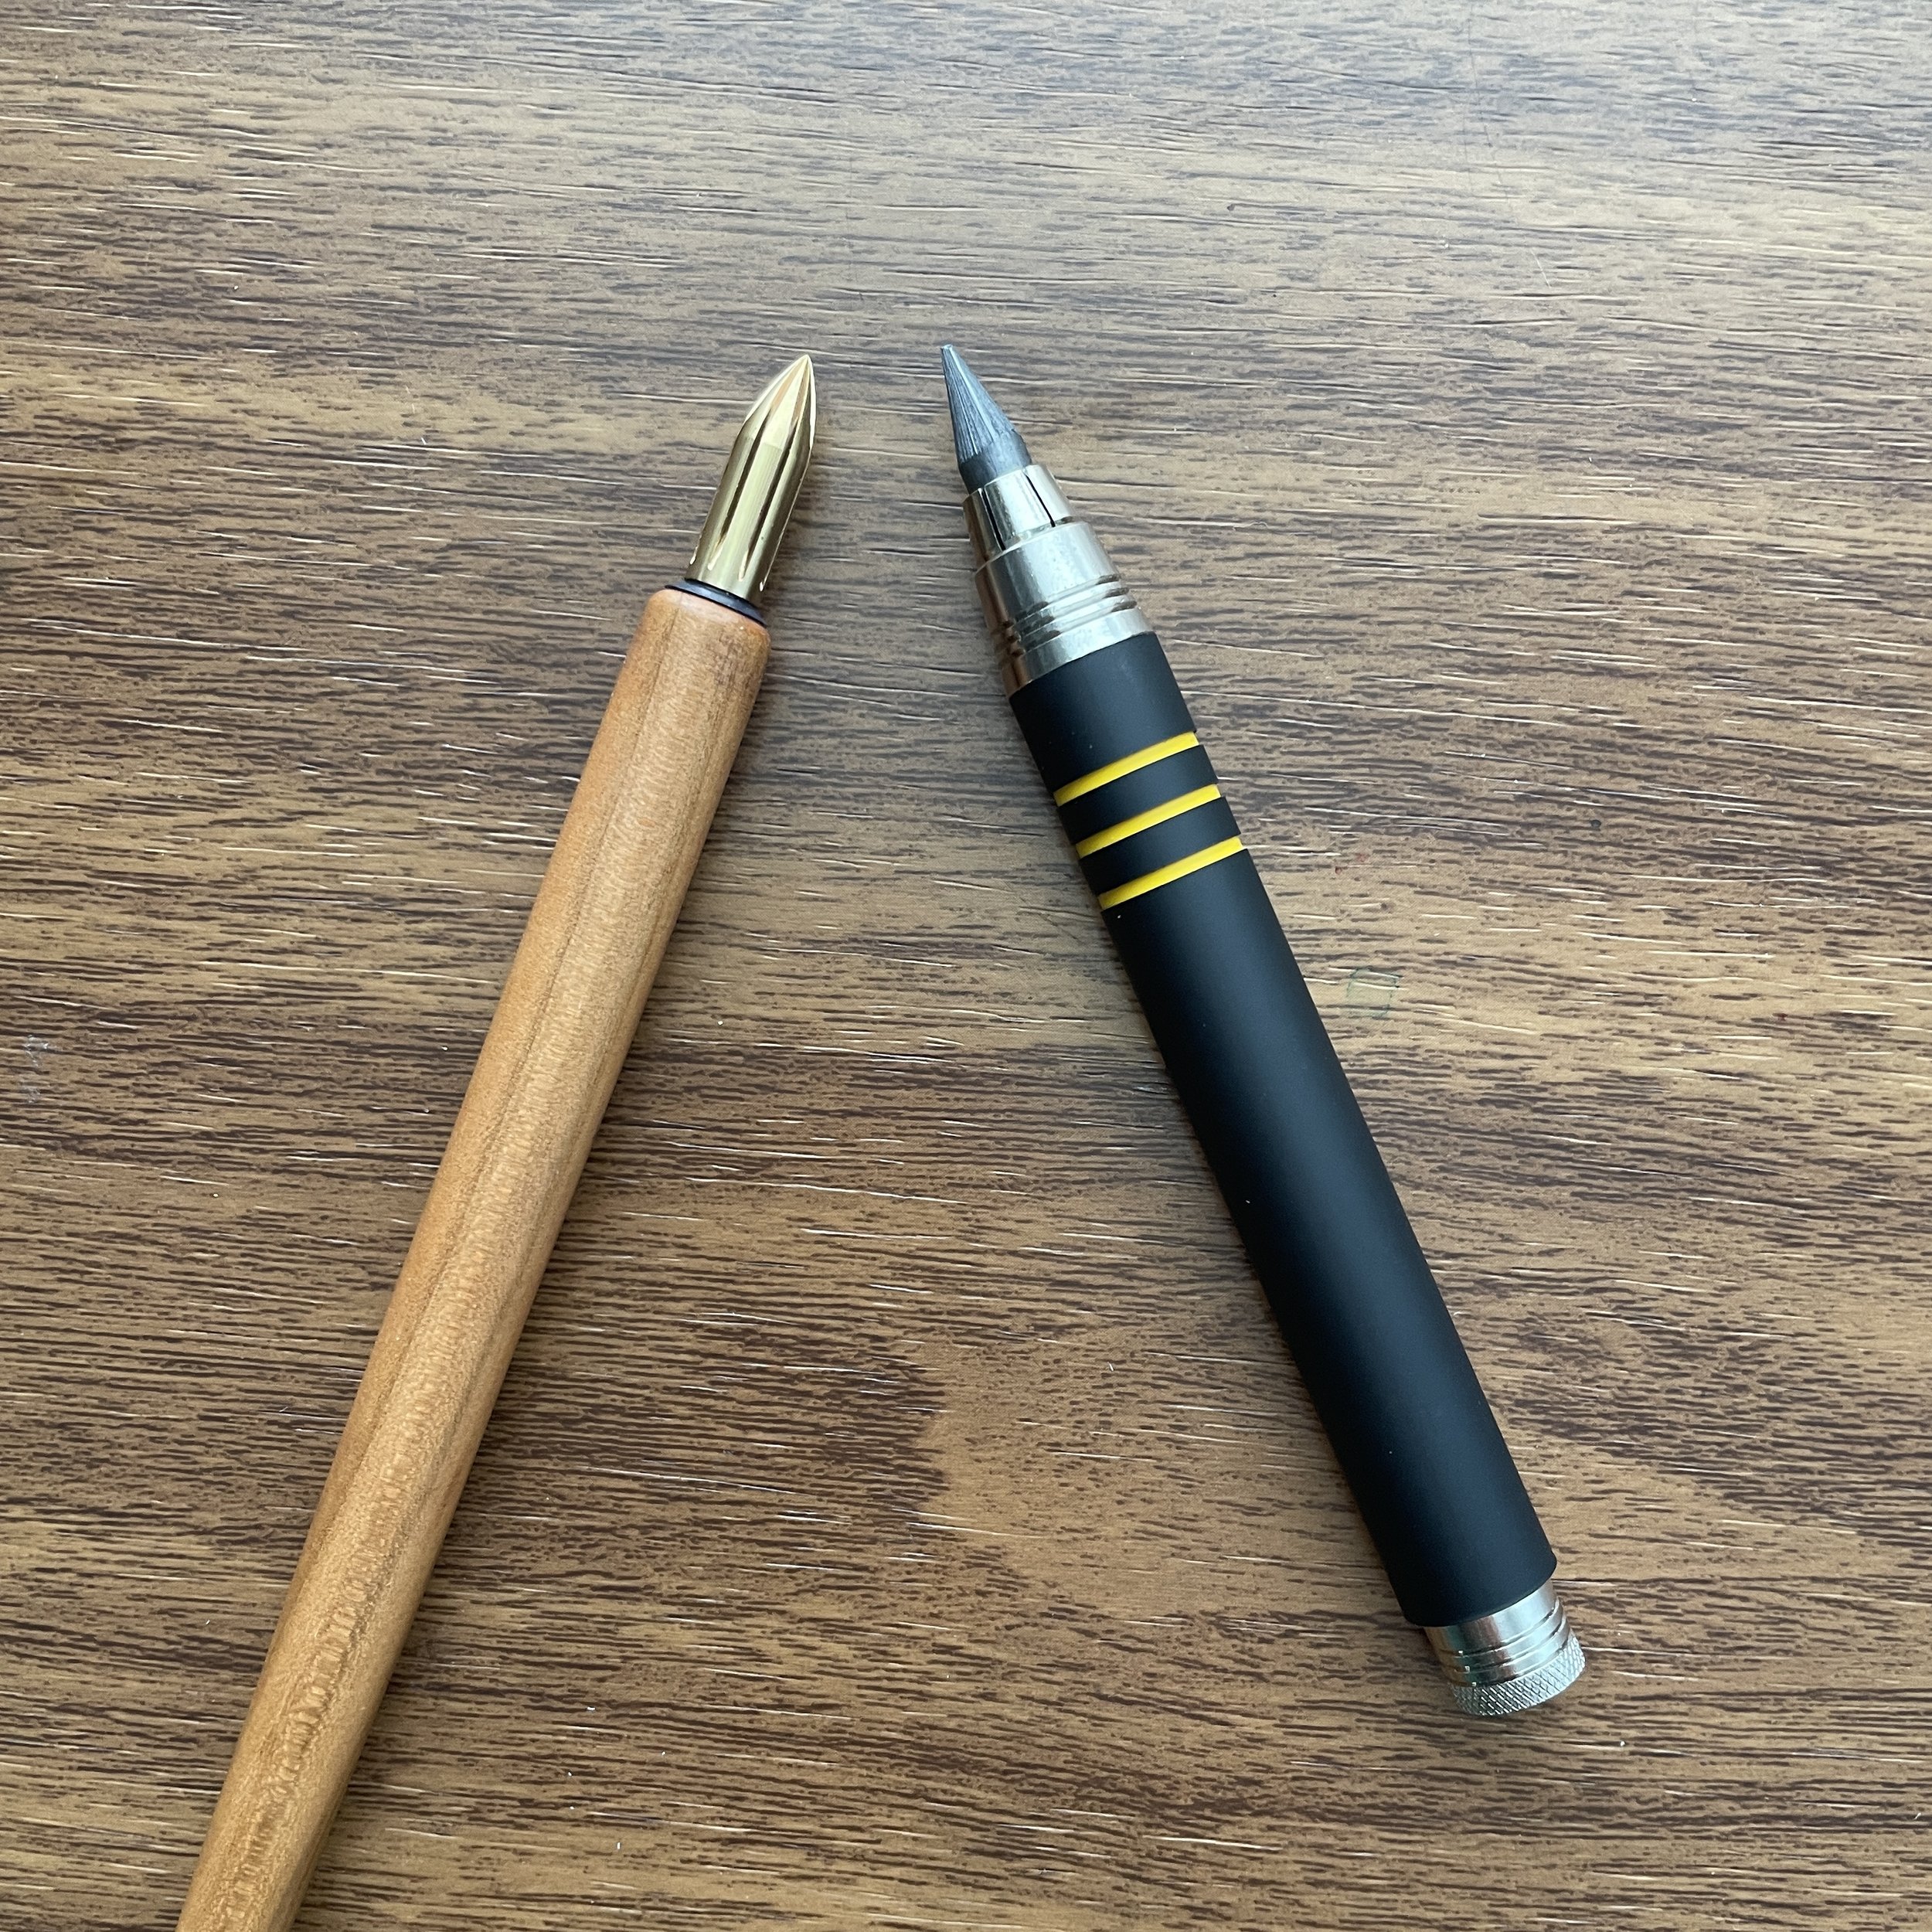 Pencil Review: The Original (Palomino) Blackwing — The Gentleman Stationer